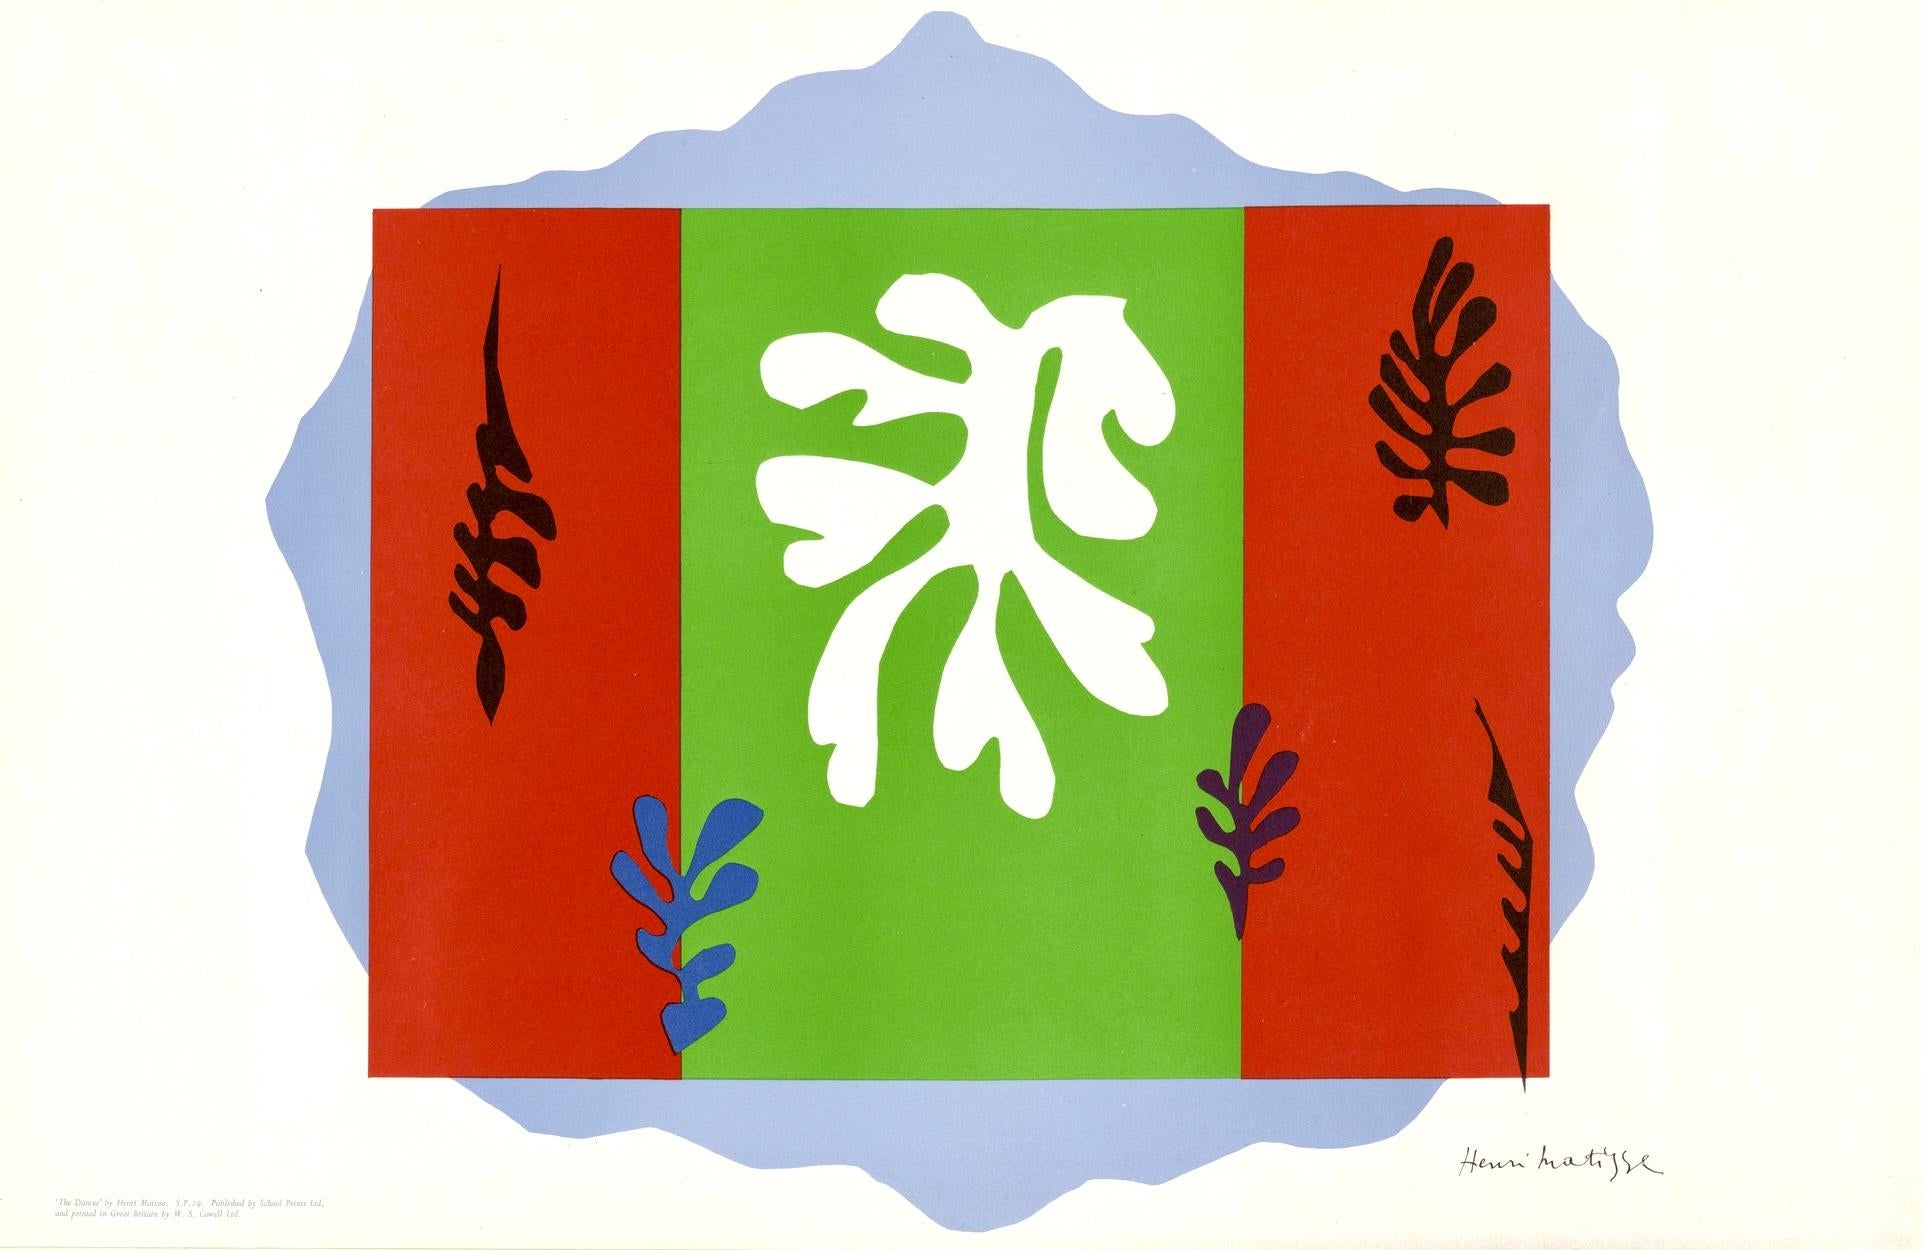 Lithograph on English cartridge paper. Inscription: Unsigned and unnumbered, as issued. Good Condition; never framed or matted. Notes: Published by School Prints Ltd., London; Printed by W. S. Cowell Ltd., Ipswich, 1949.

HENRI MATISSE (1869-1954)